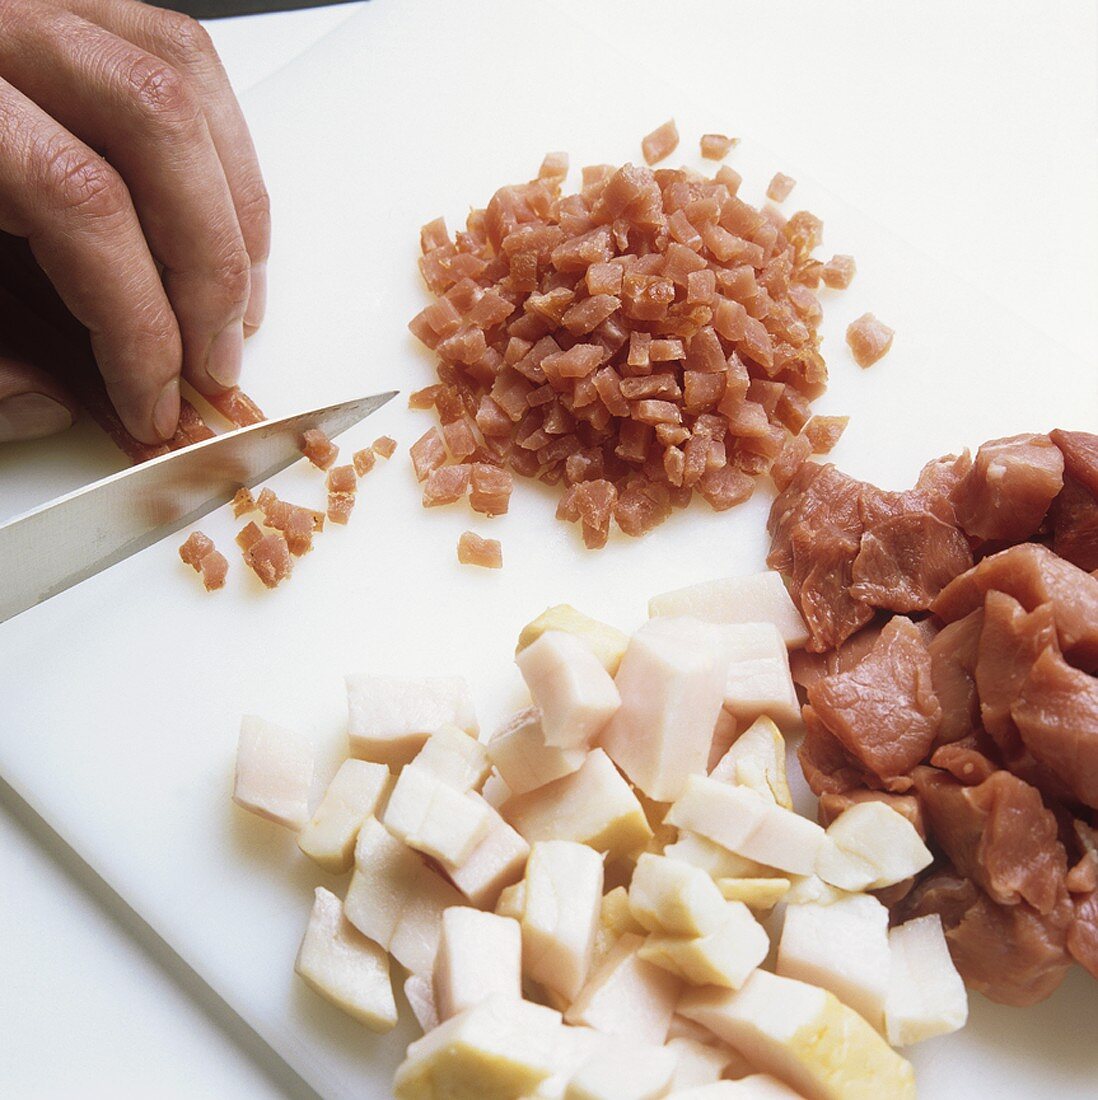 Dicing meat and ham